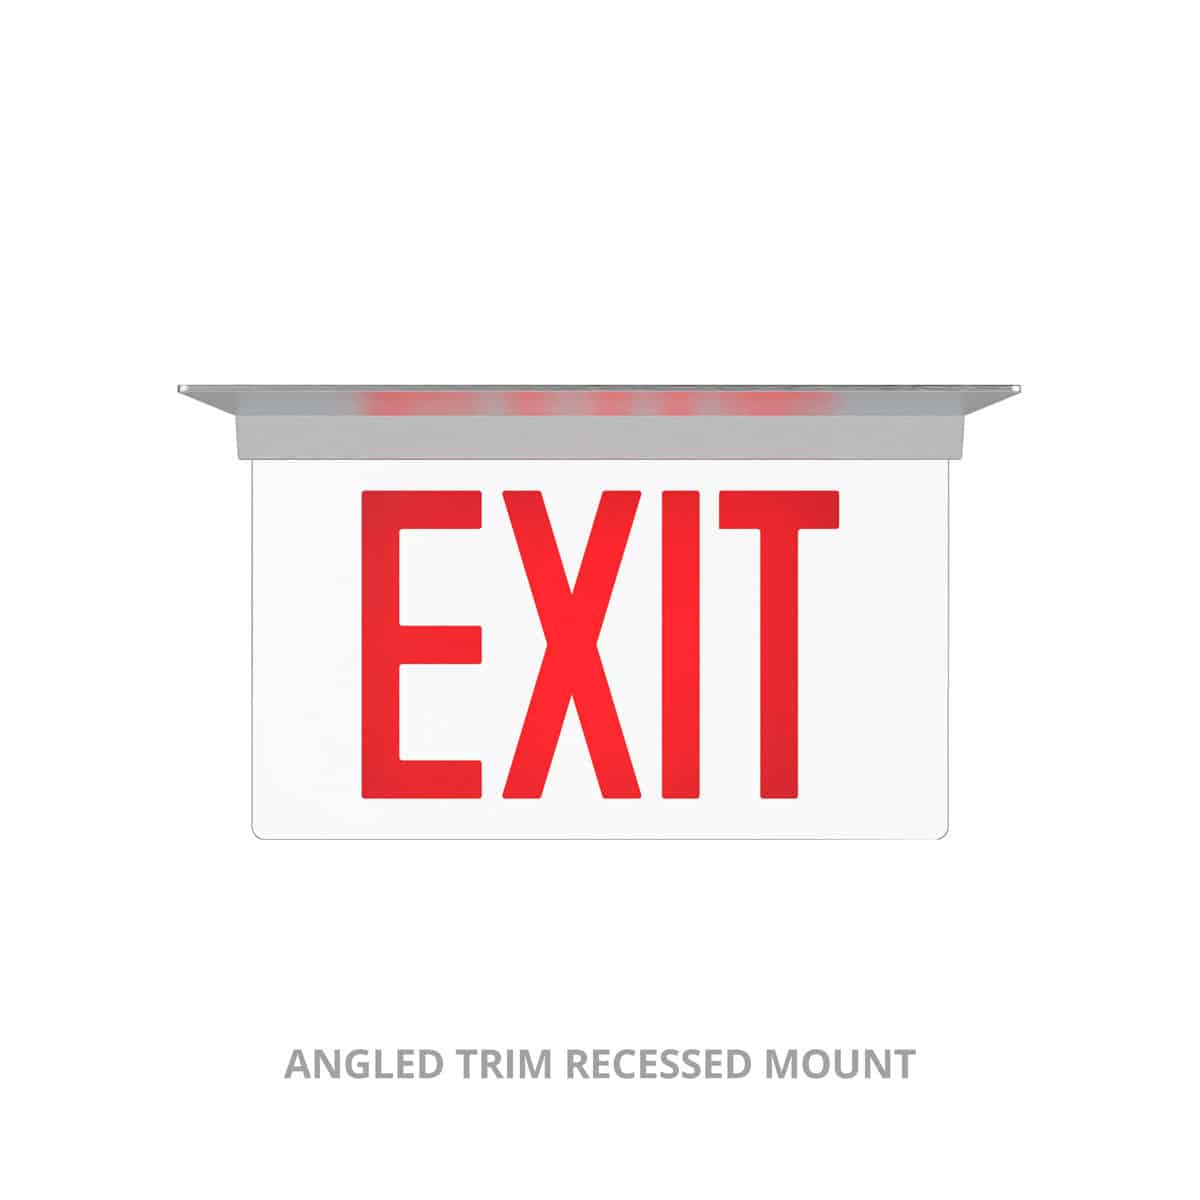 The ELT2_ANGLED-TRIM Elite Edge-Lit Exit Sign is a maintenance-free LED Light source with a 25+ years life expectancy.